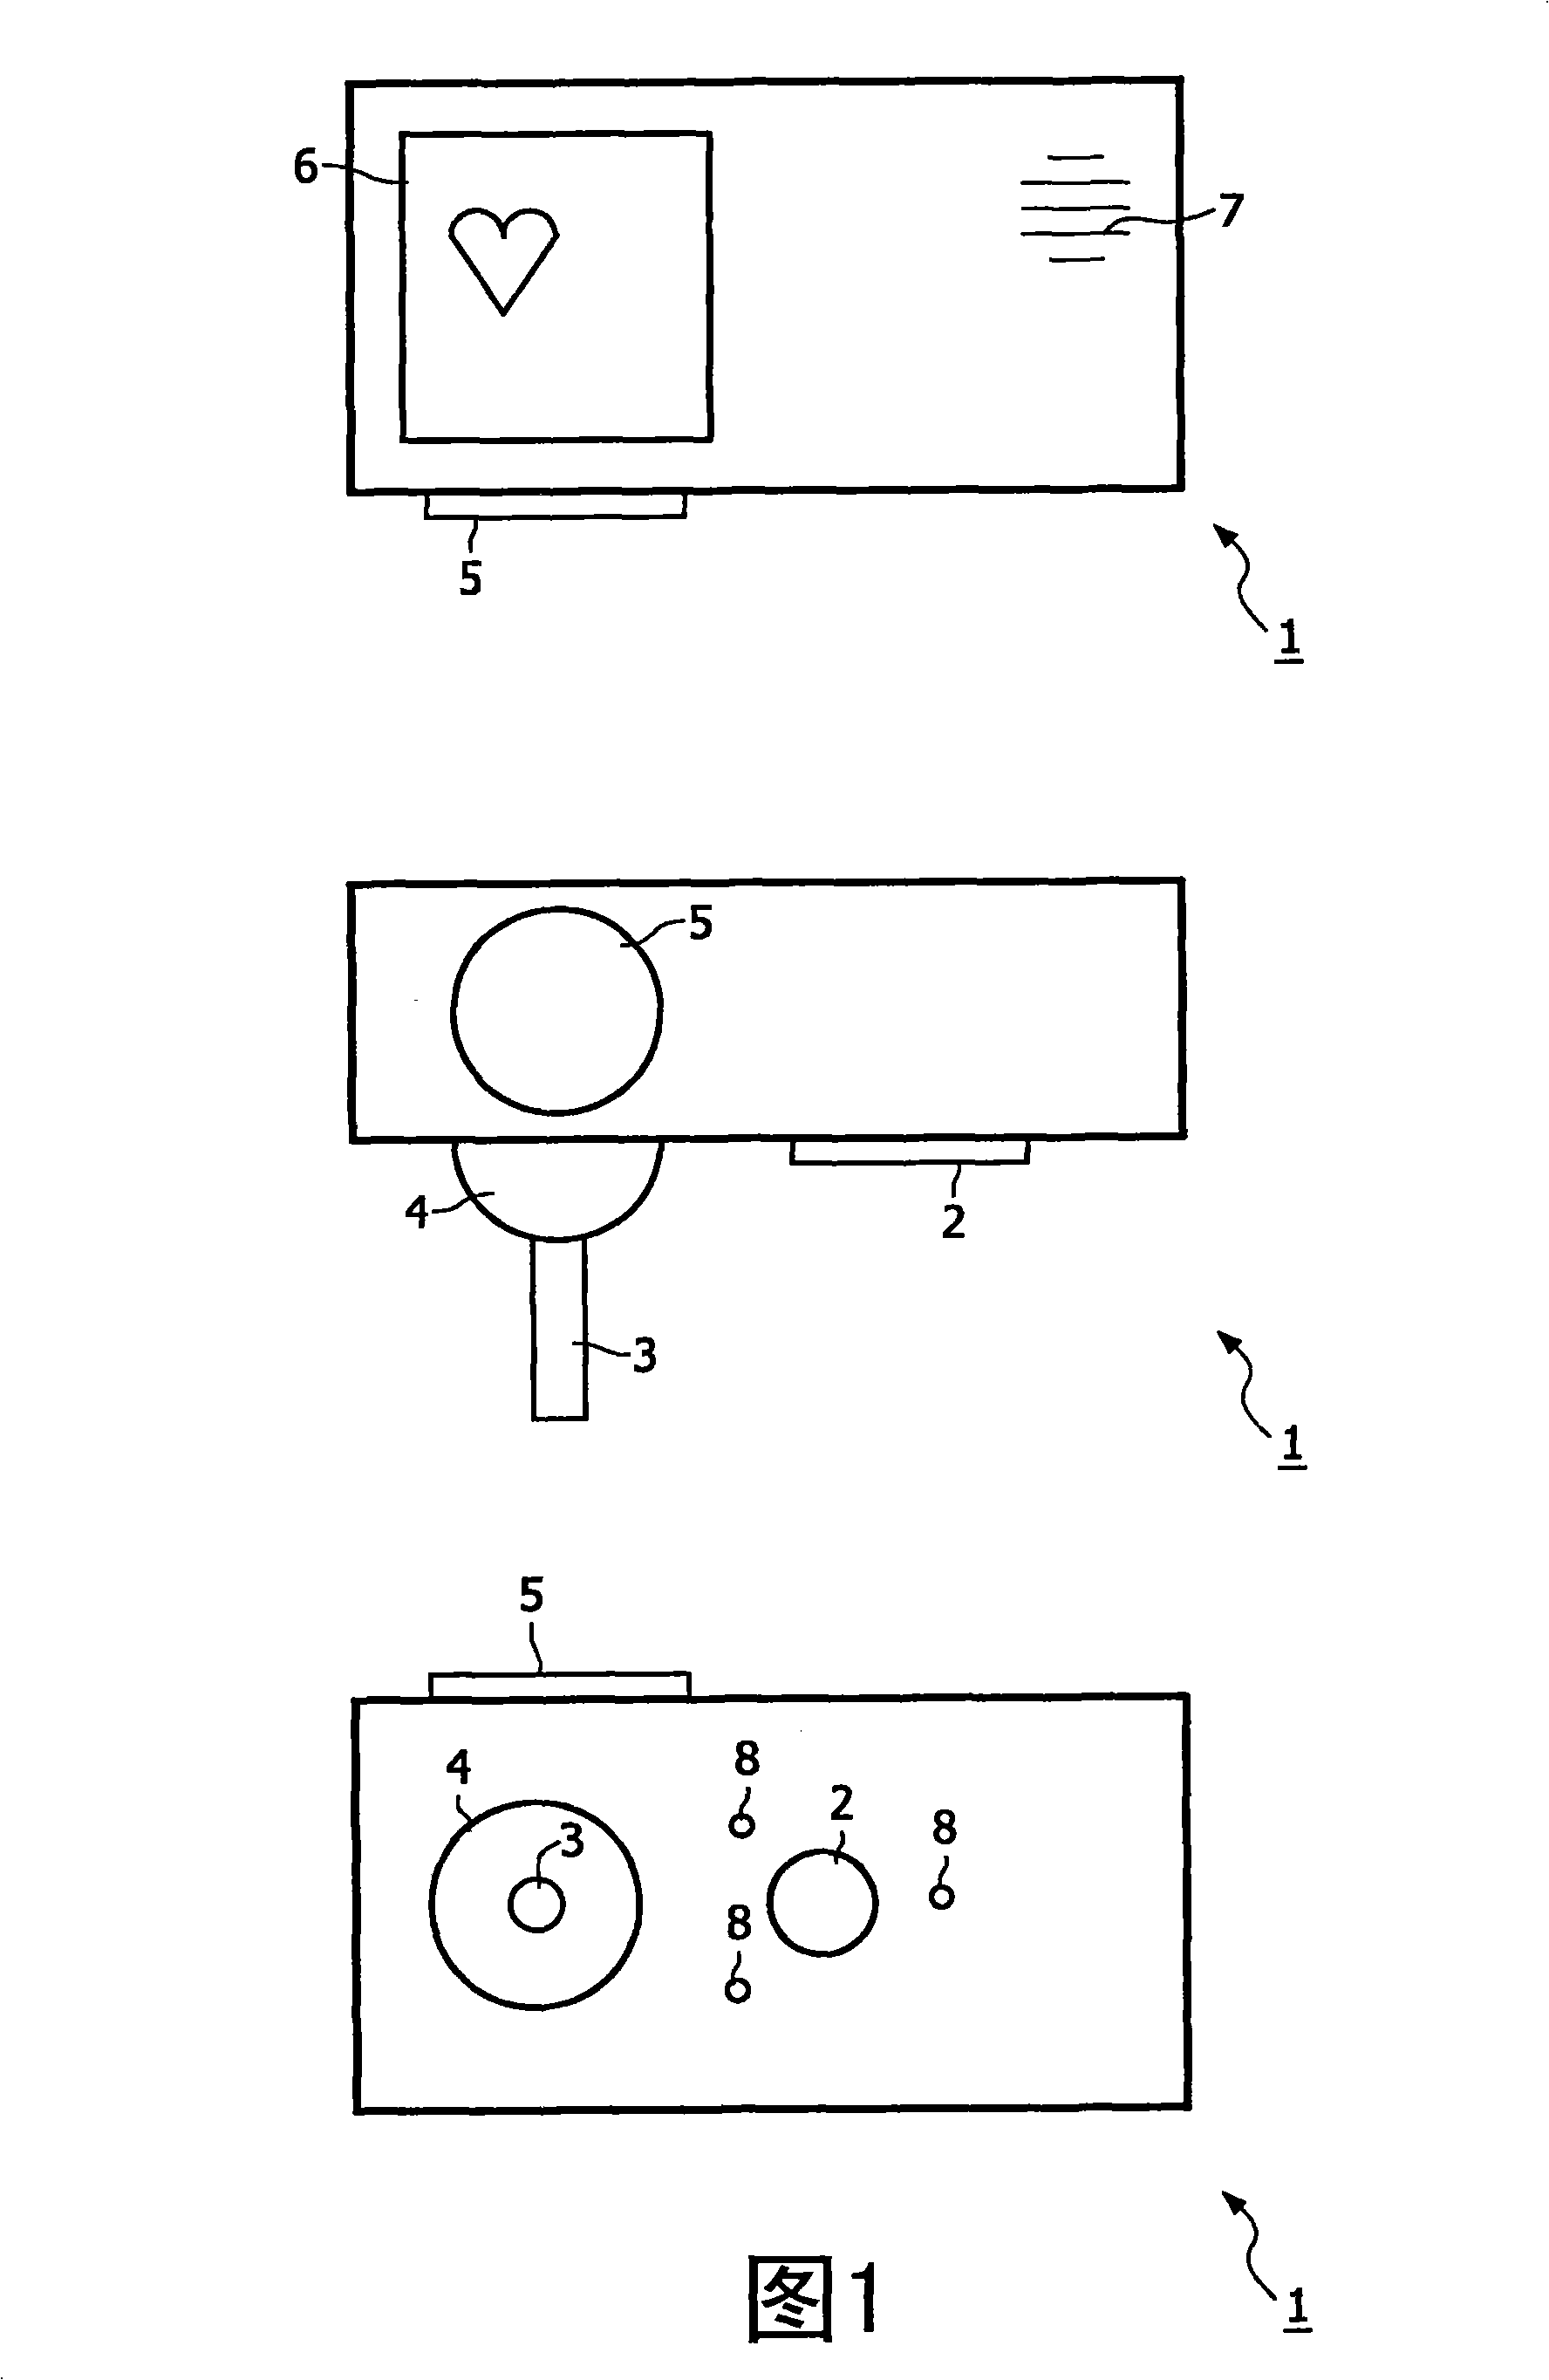 Skin stimulation device and a method and computer program product for detecting a skin stimulation location